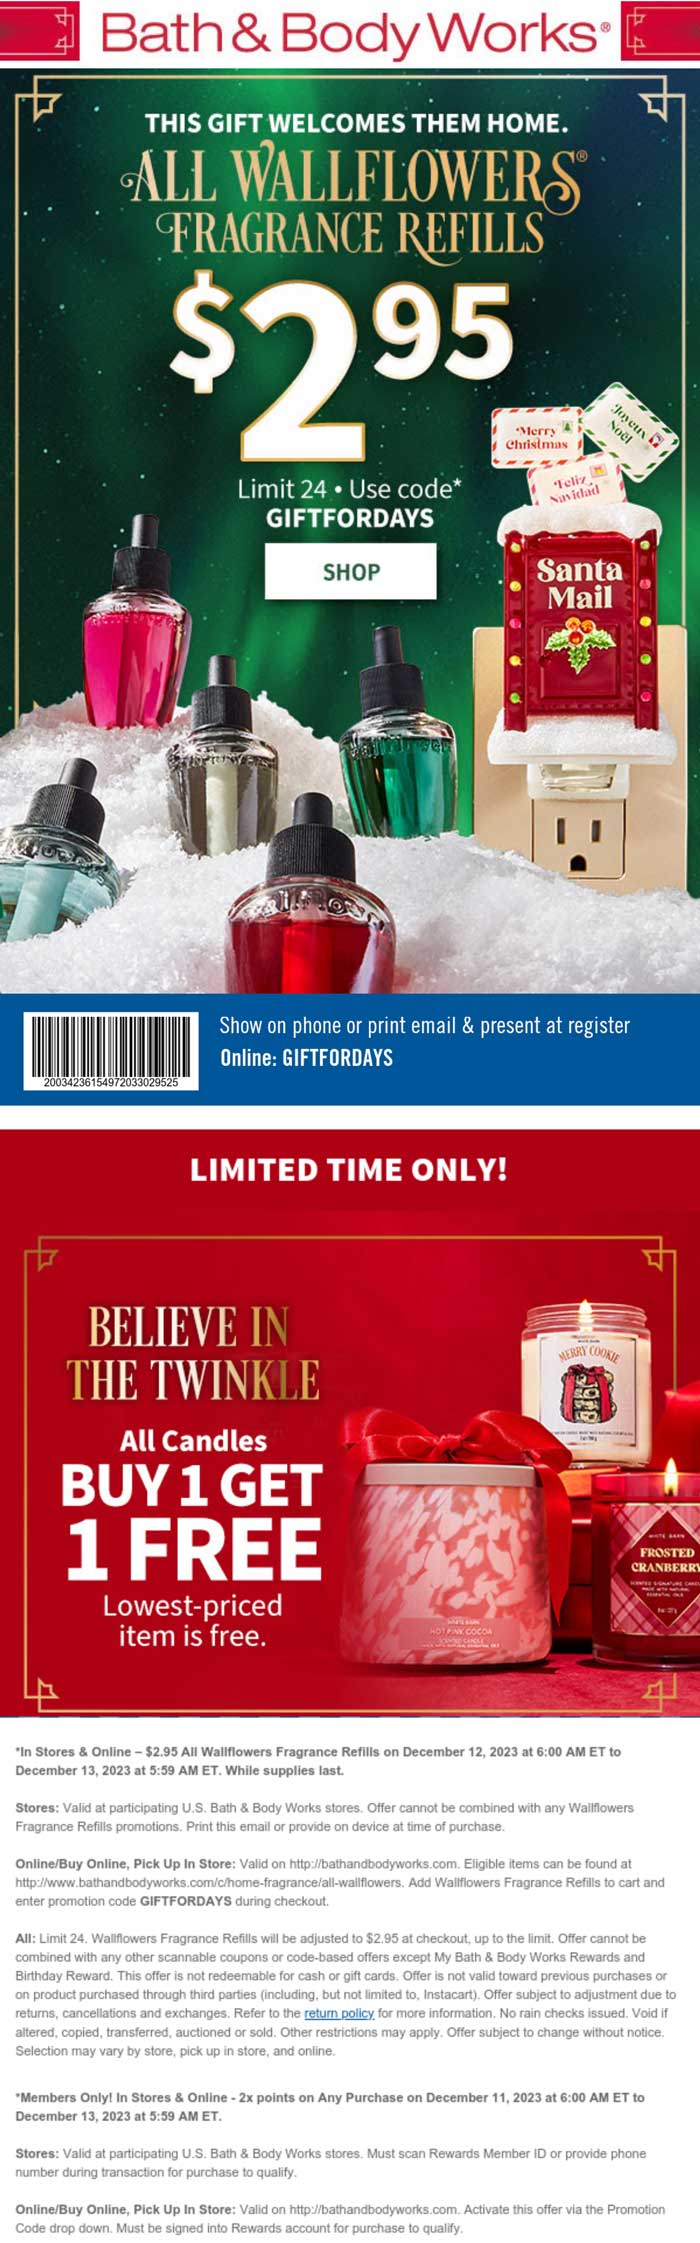 $3 fragrance refills & second candle free today at Bath & Body Works, or online via promo code GIFTFORDAYS #bathbodyworks